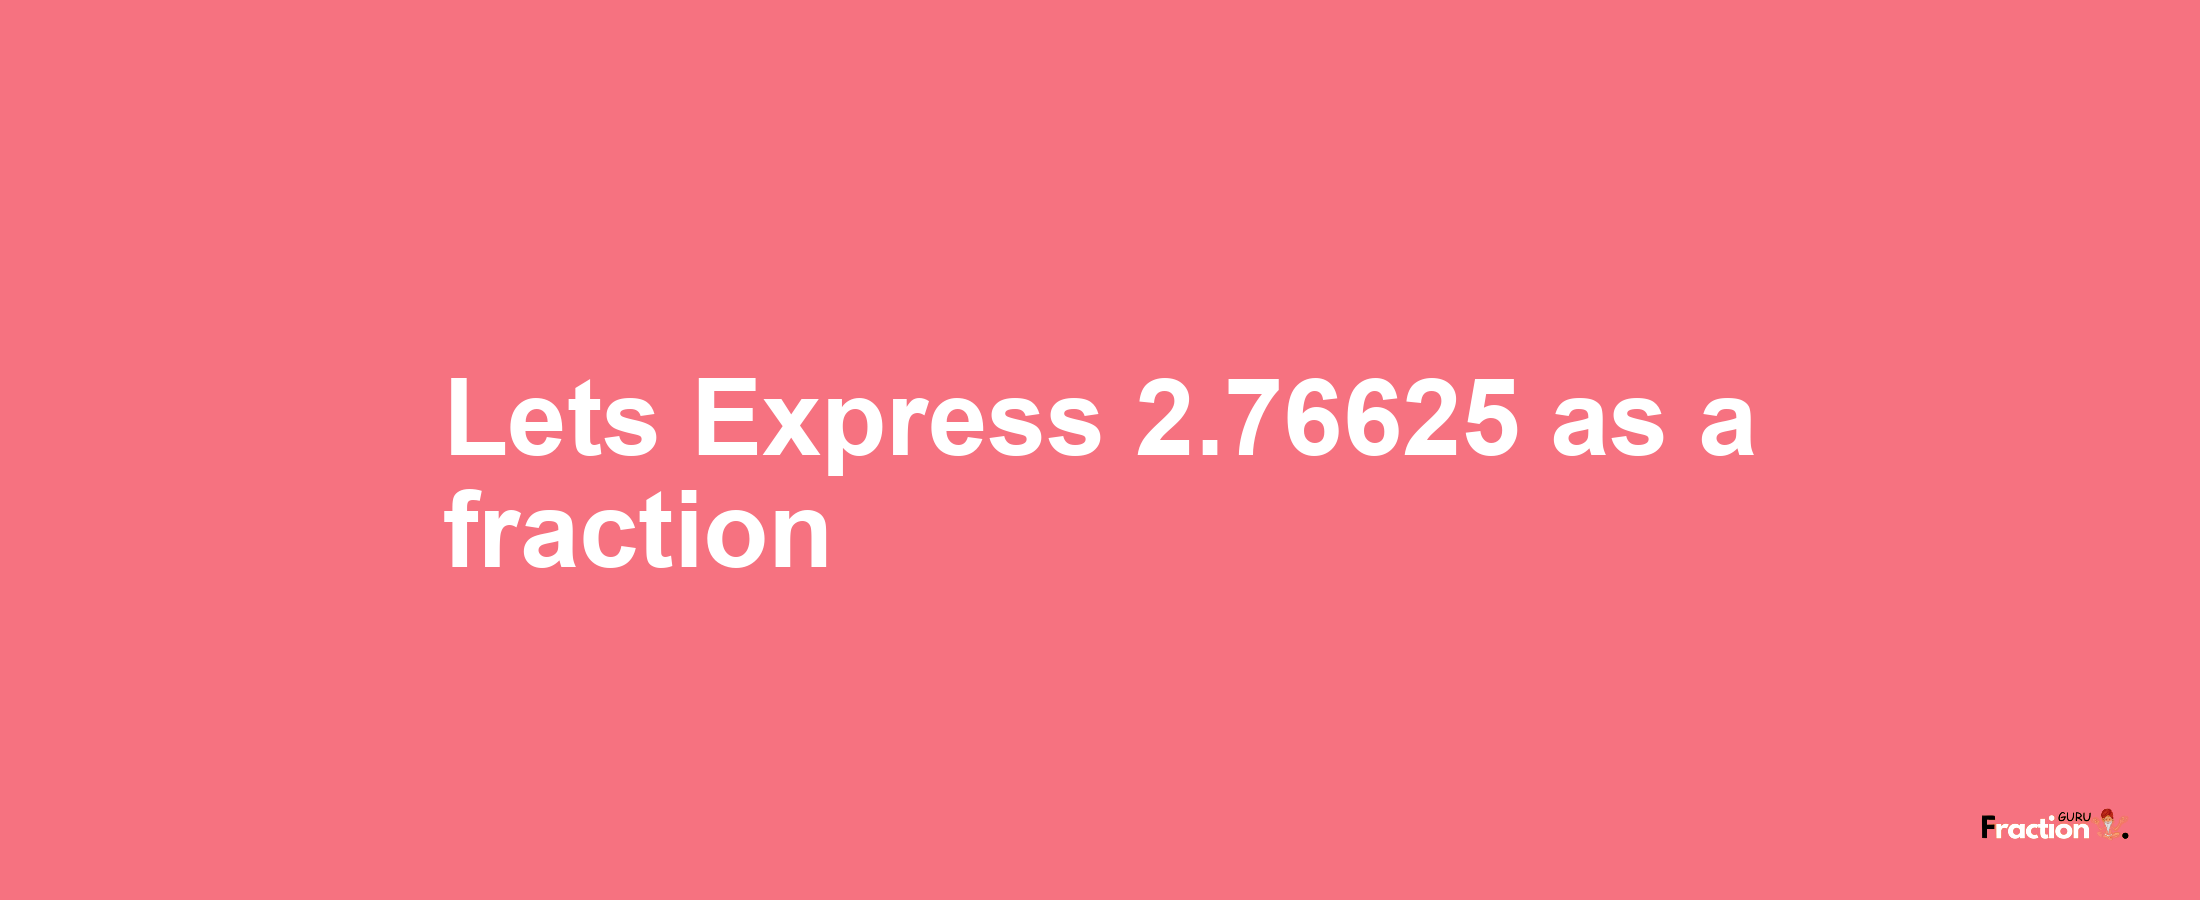 Lets Express 2.76625 as afraction